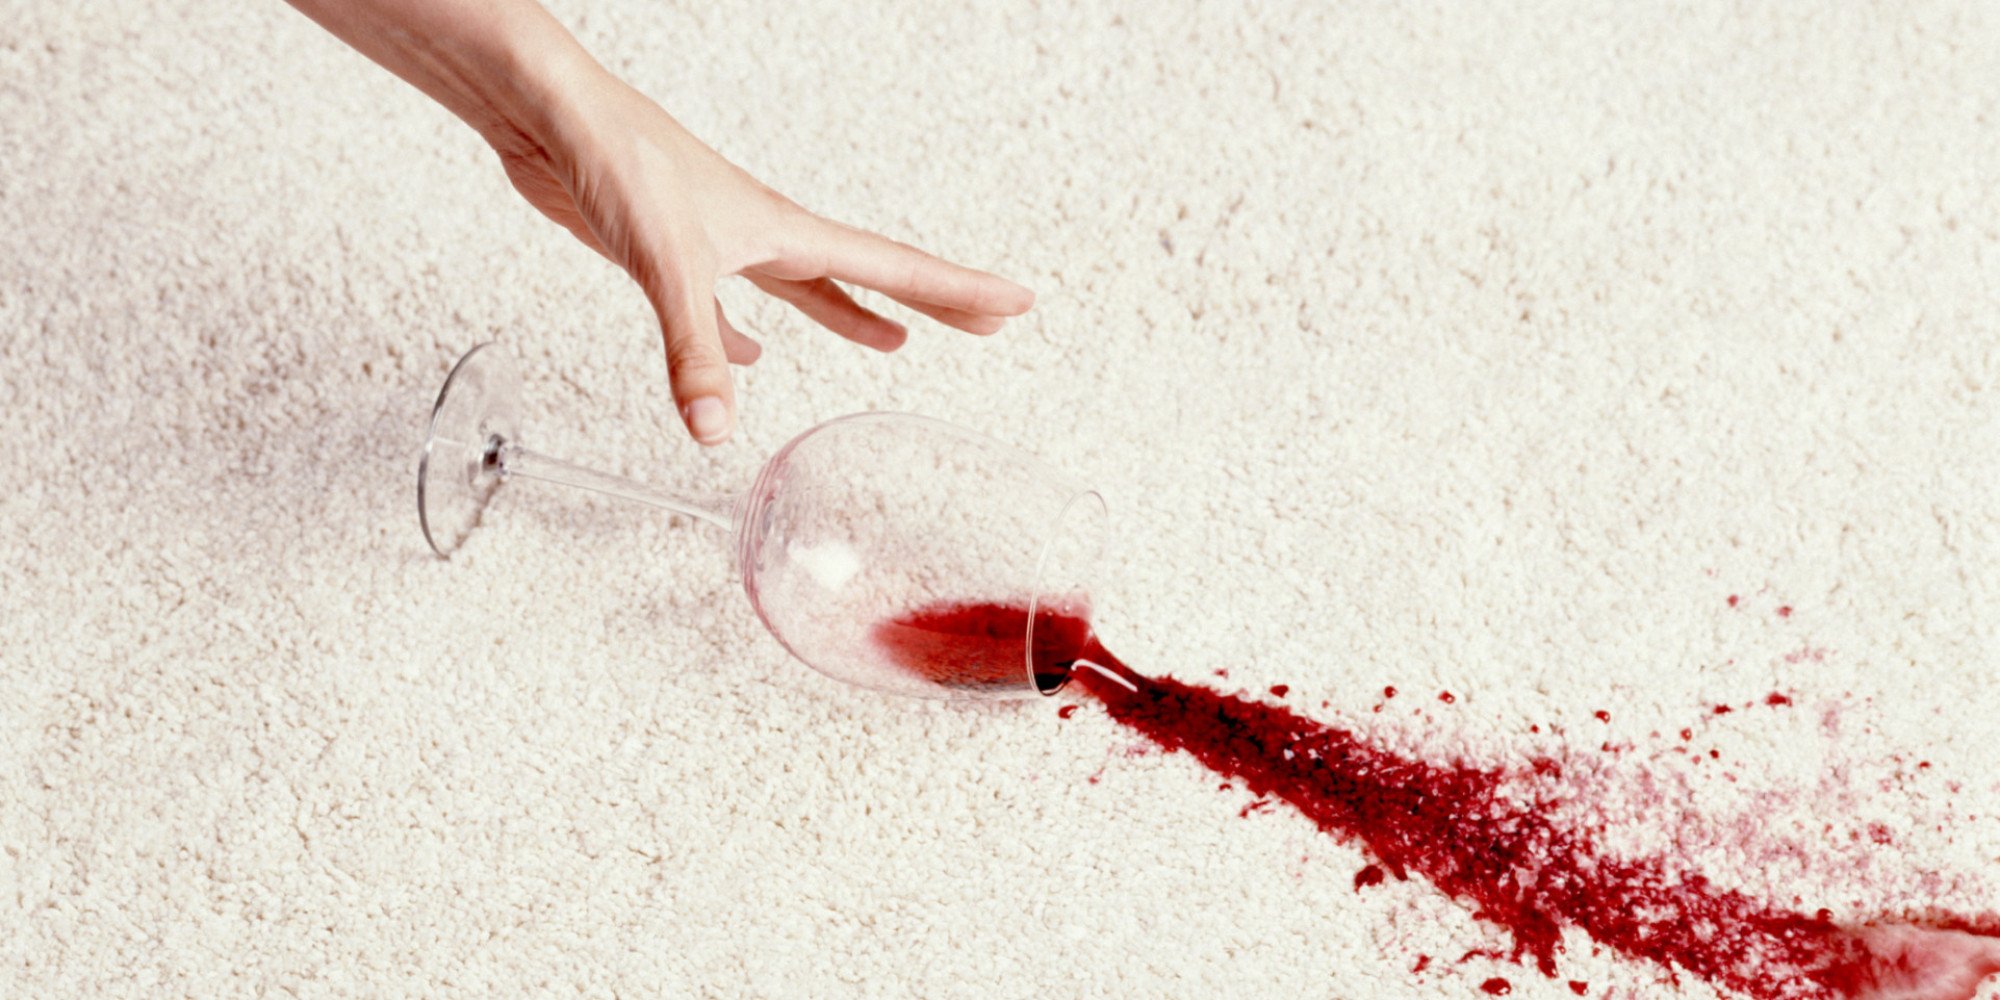 The Best Tips For Cleaning Red Wine Stains